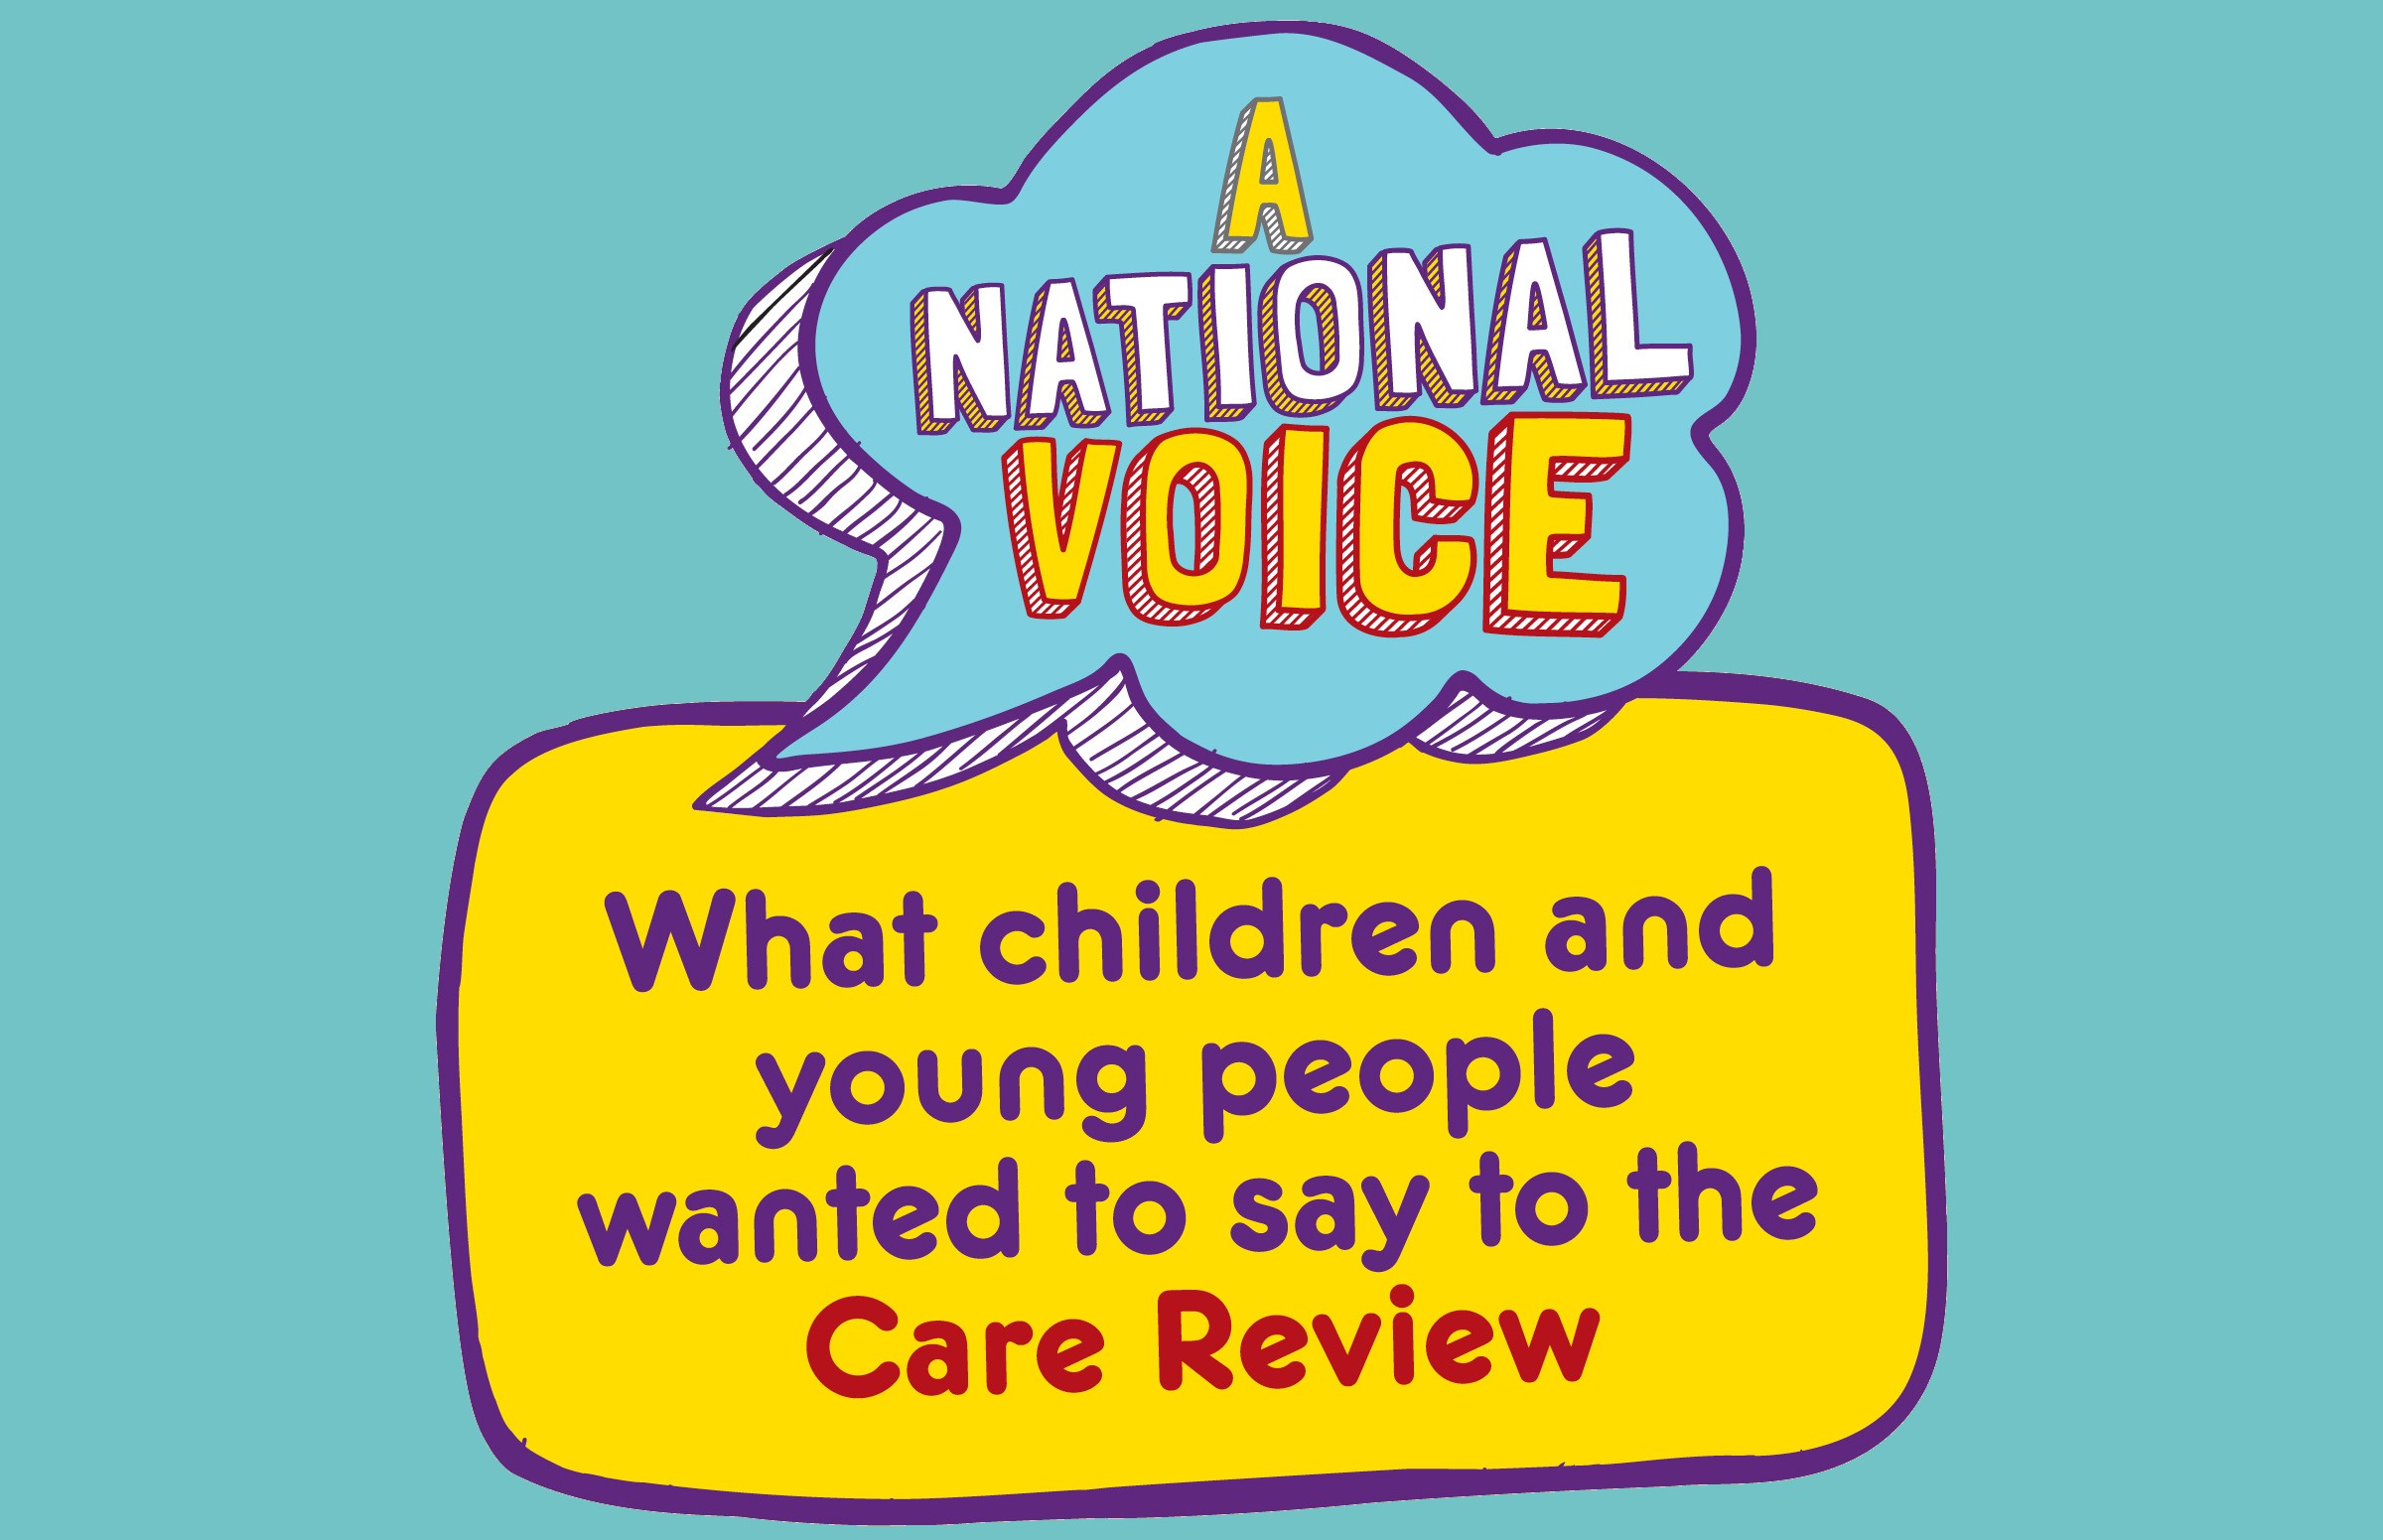 A National Voice publish your thoughts about the Care Review